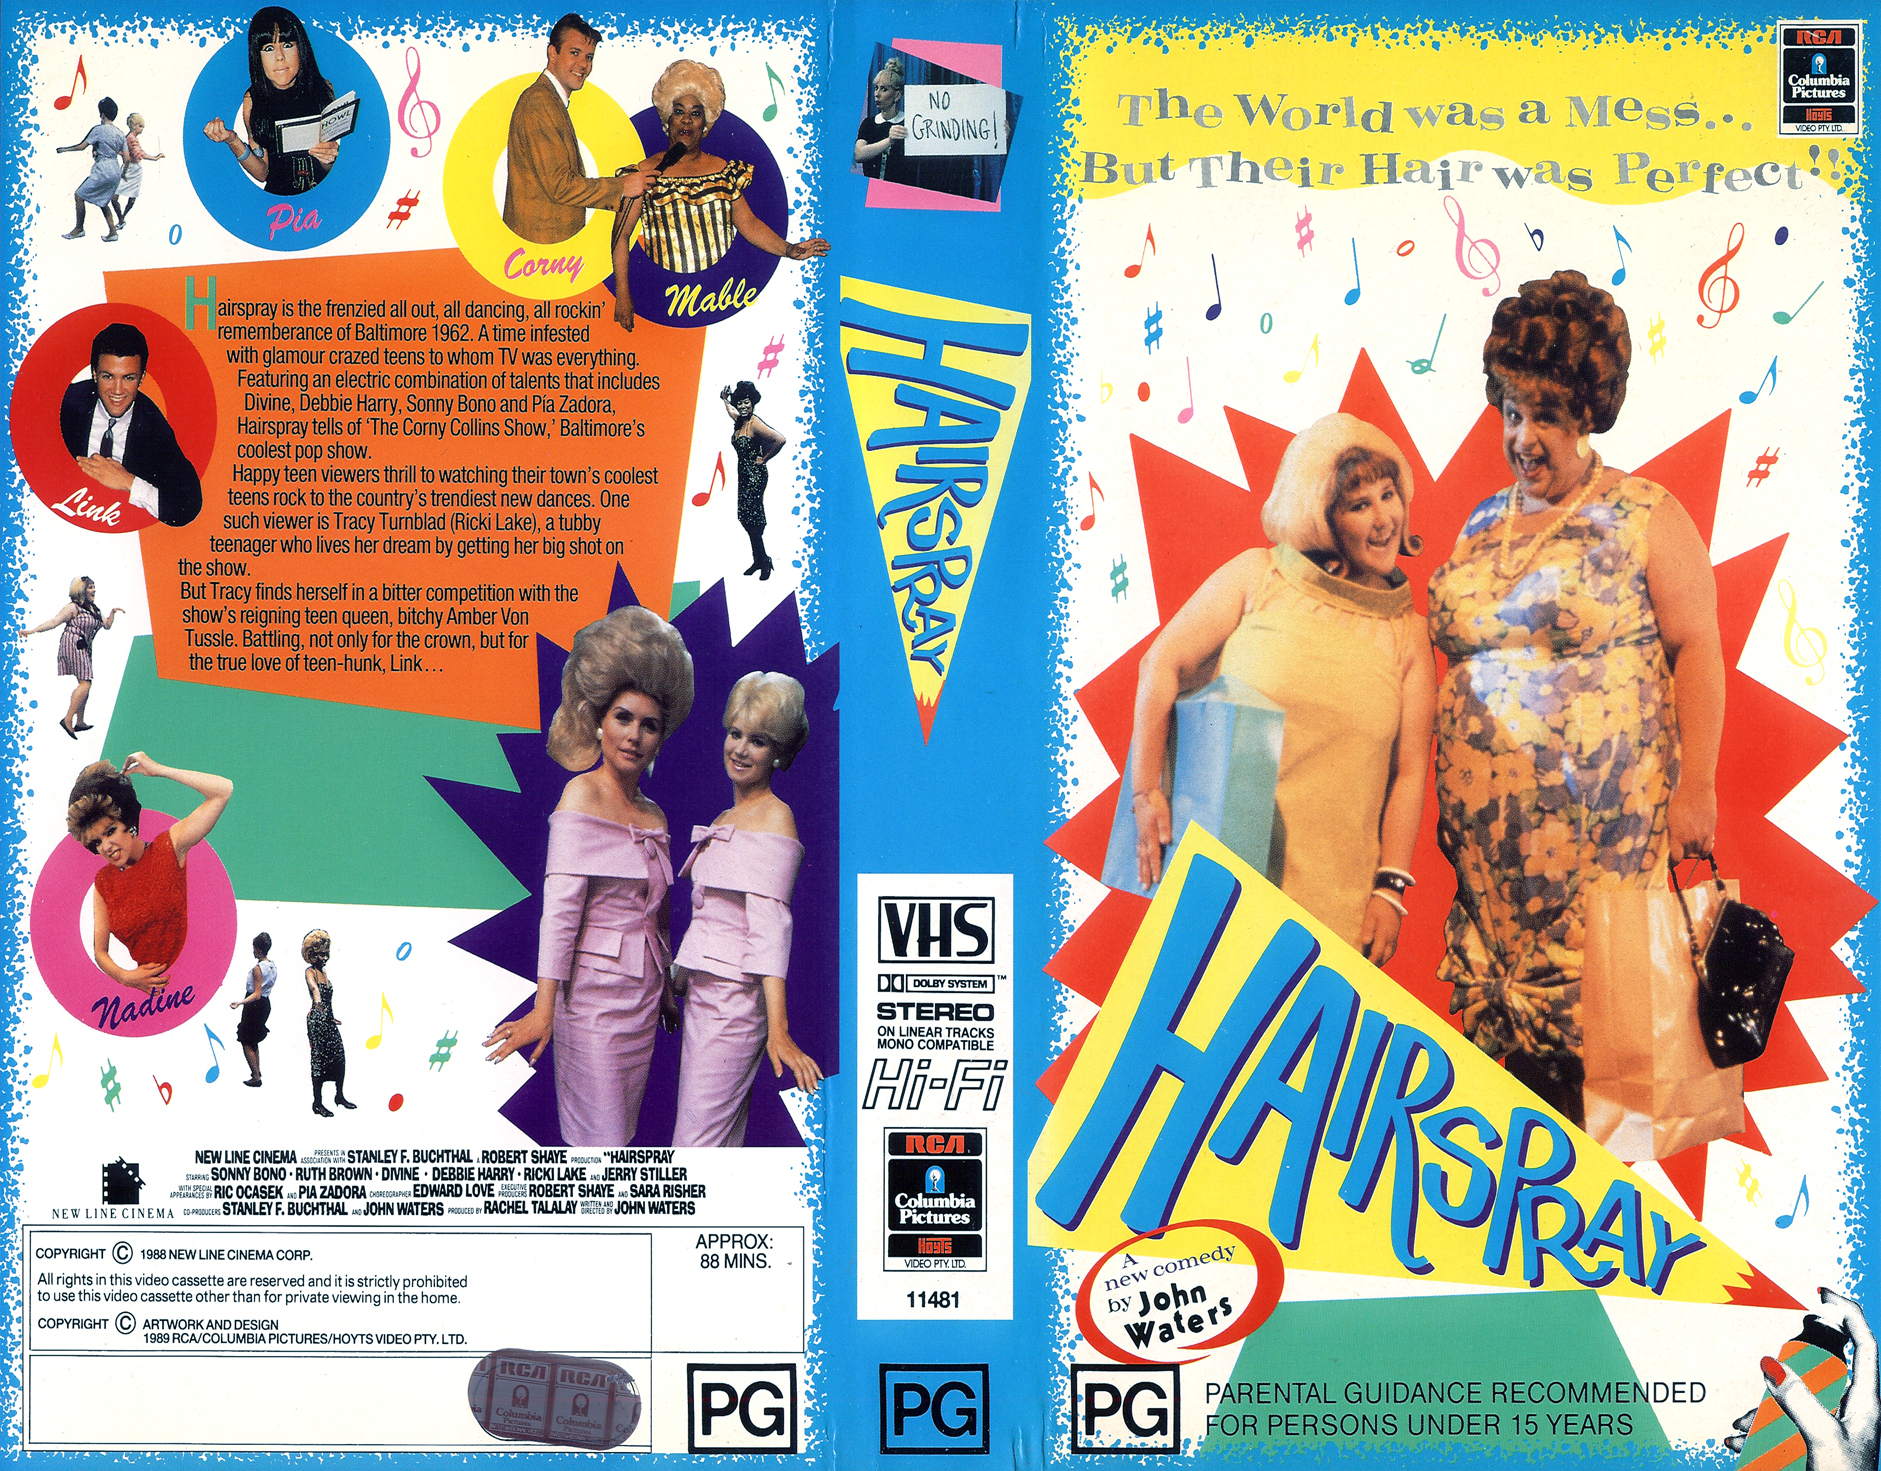 October 18 2011 VHS cover scan - click for high res version hairspray - sub...